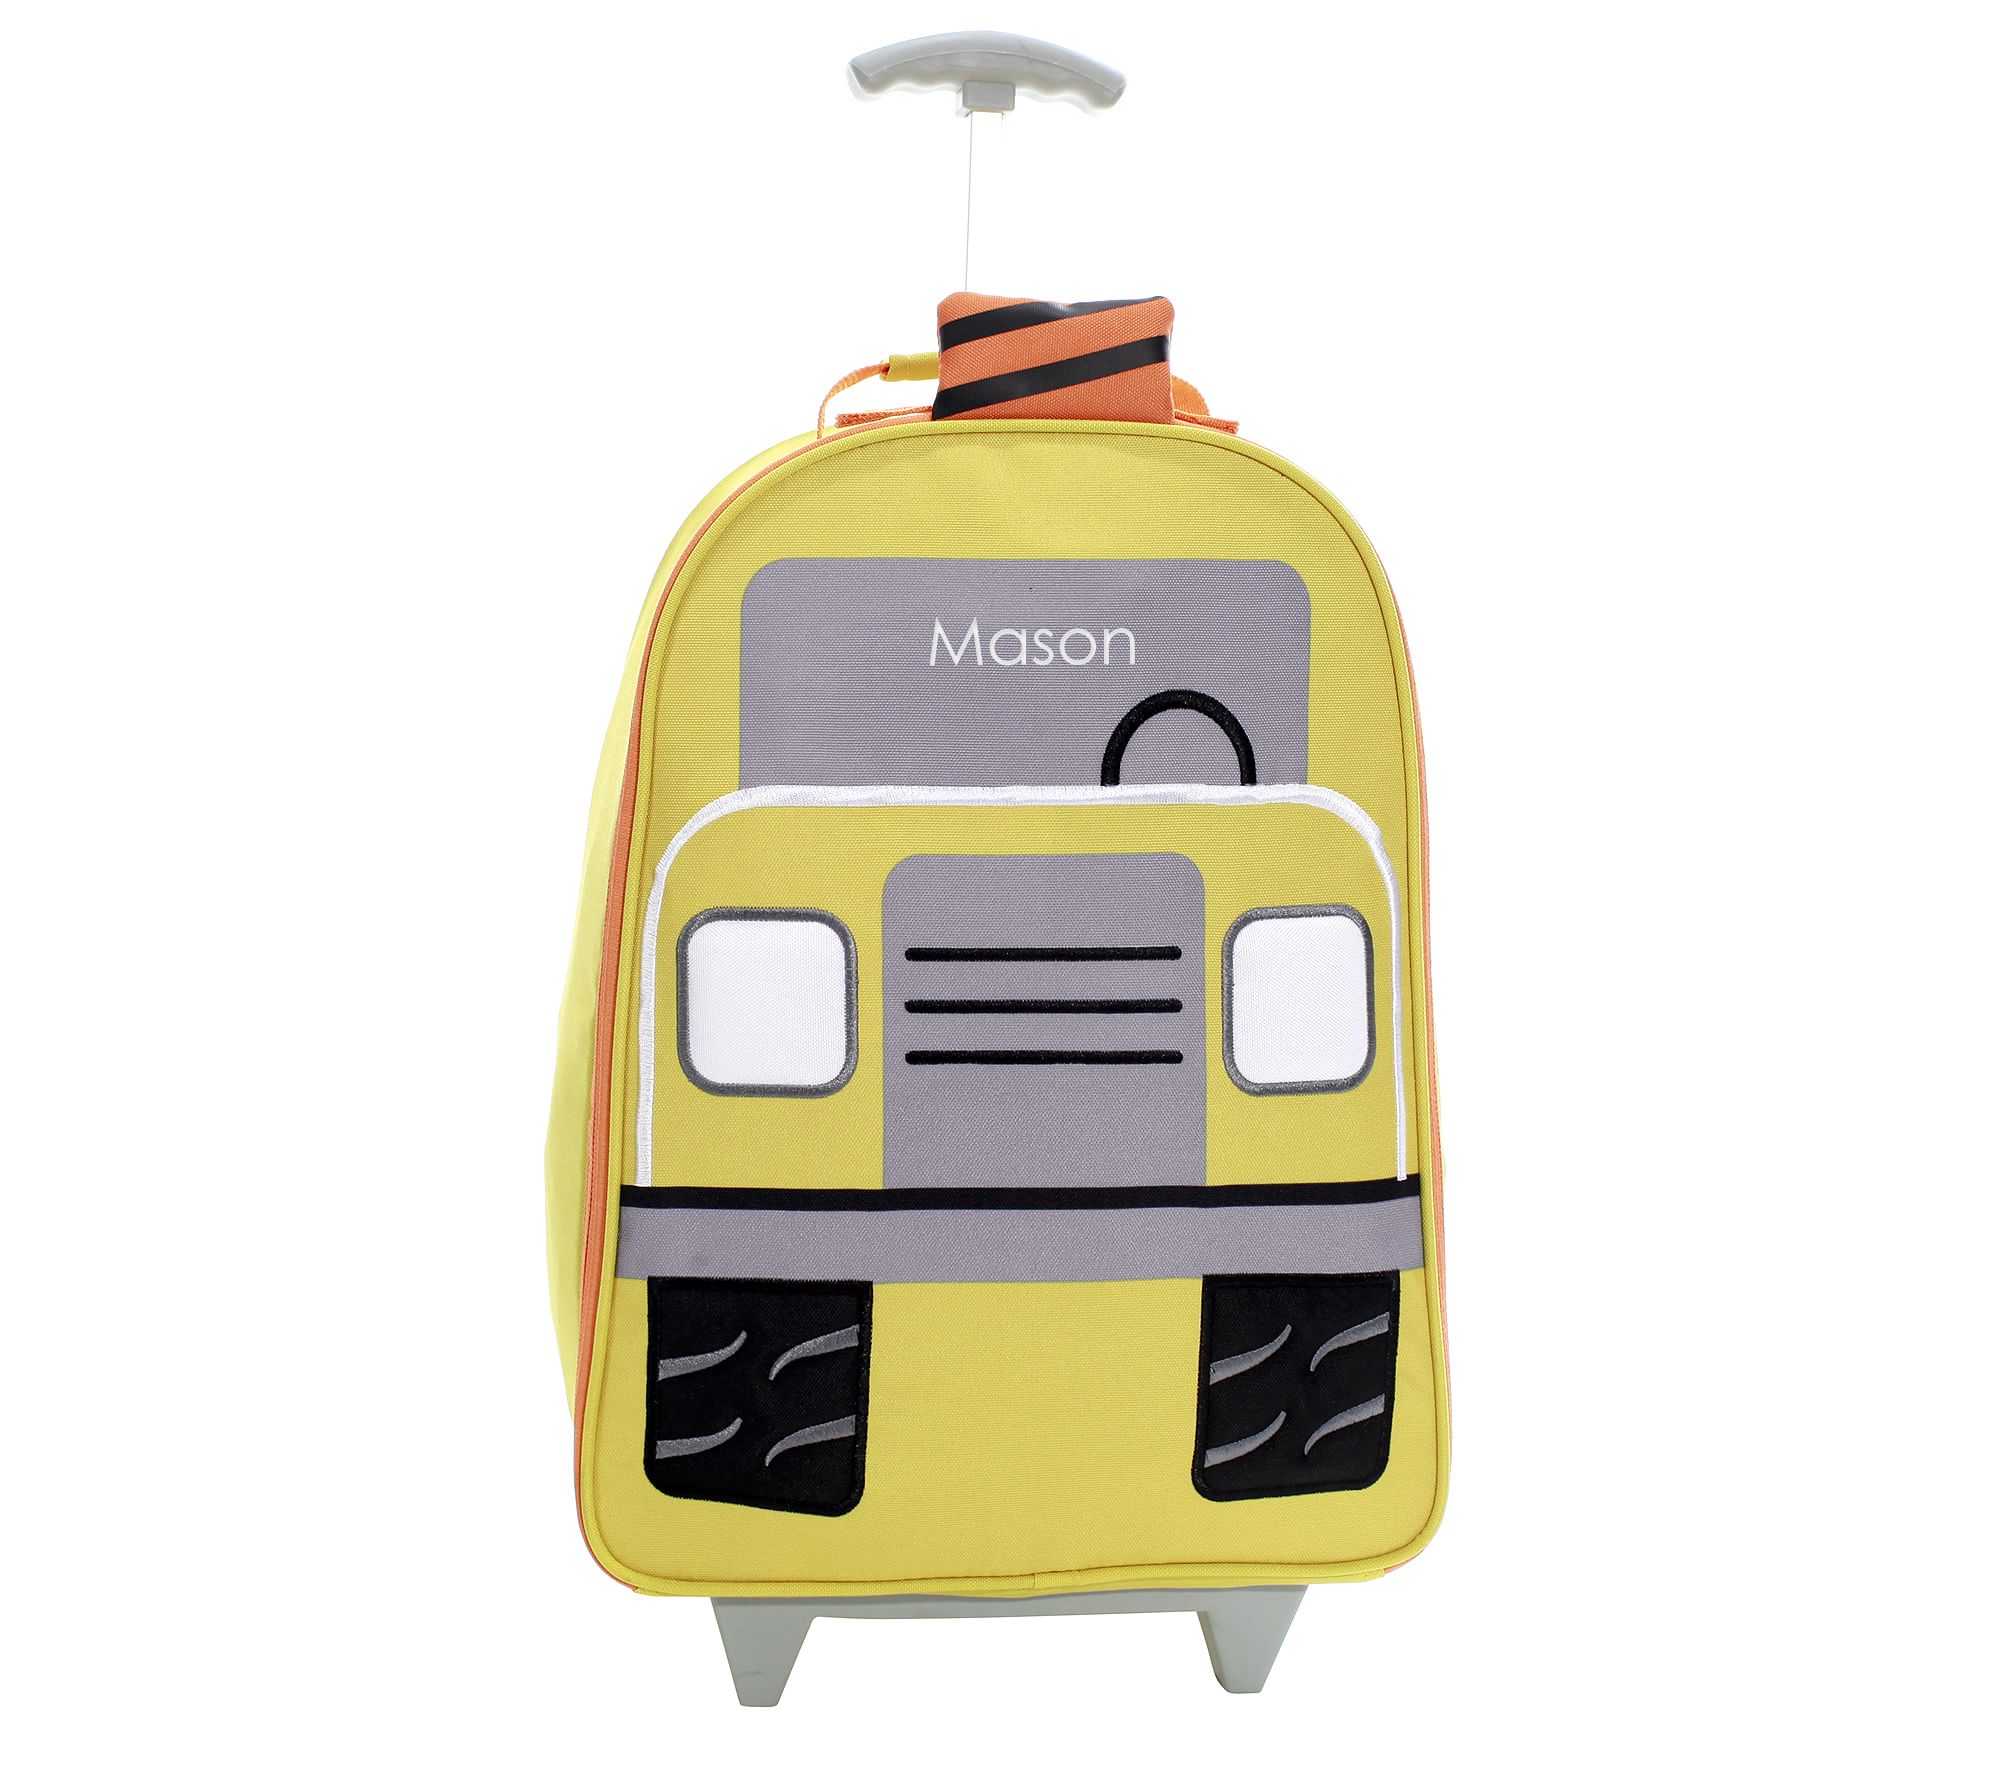 Little Critter Construction Truck Luggage by Pottery Barn Kids for the best kids luggage